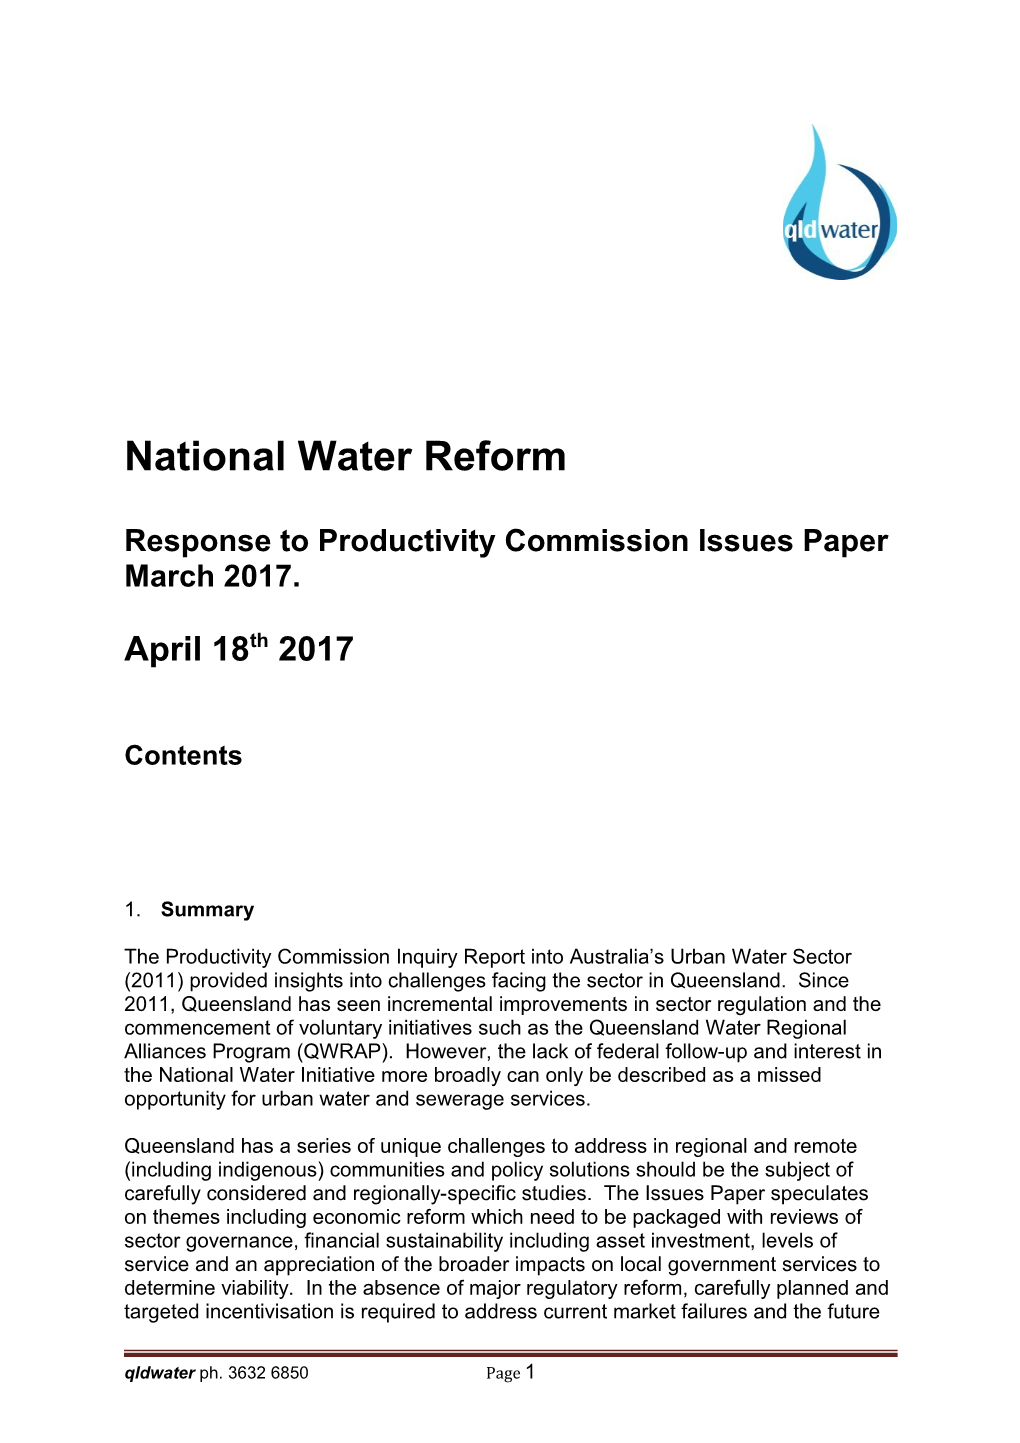 Submission 41 - Qldwater - National Water Reform - Public Inquiry